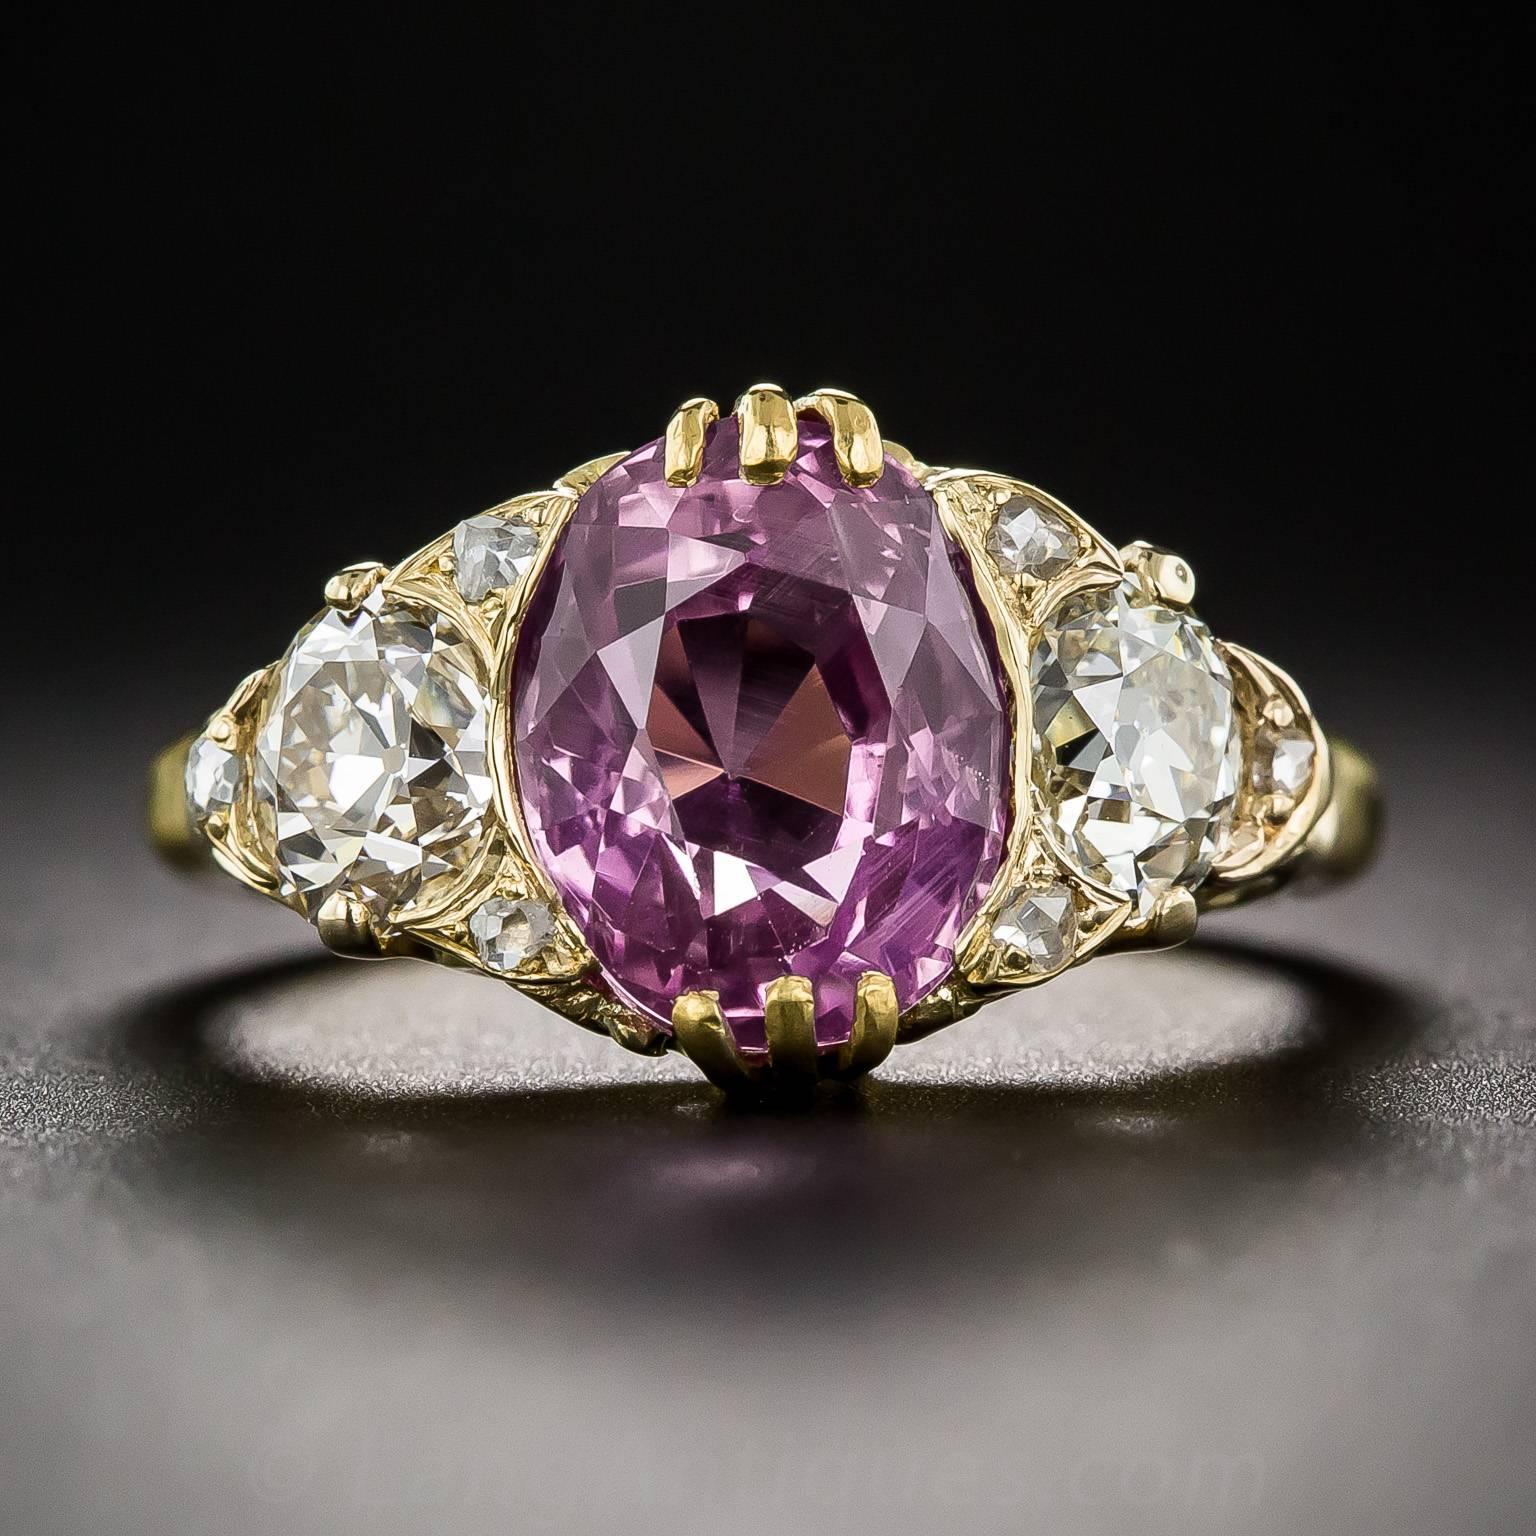 A thoroughly enchanting lavender pink sapphire, weighing 4.50 carats, natural color, no-heat treatment and of old Ceylon origin, glistens and glows between a pair of bright white old mine-cut diamonds (together weighing 1.25 carats), in this classic